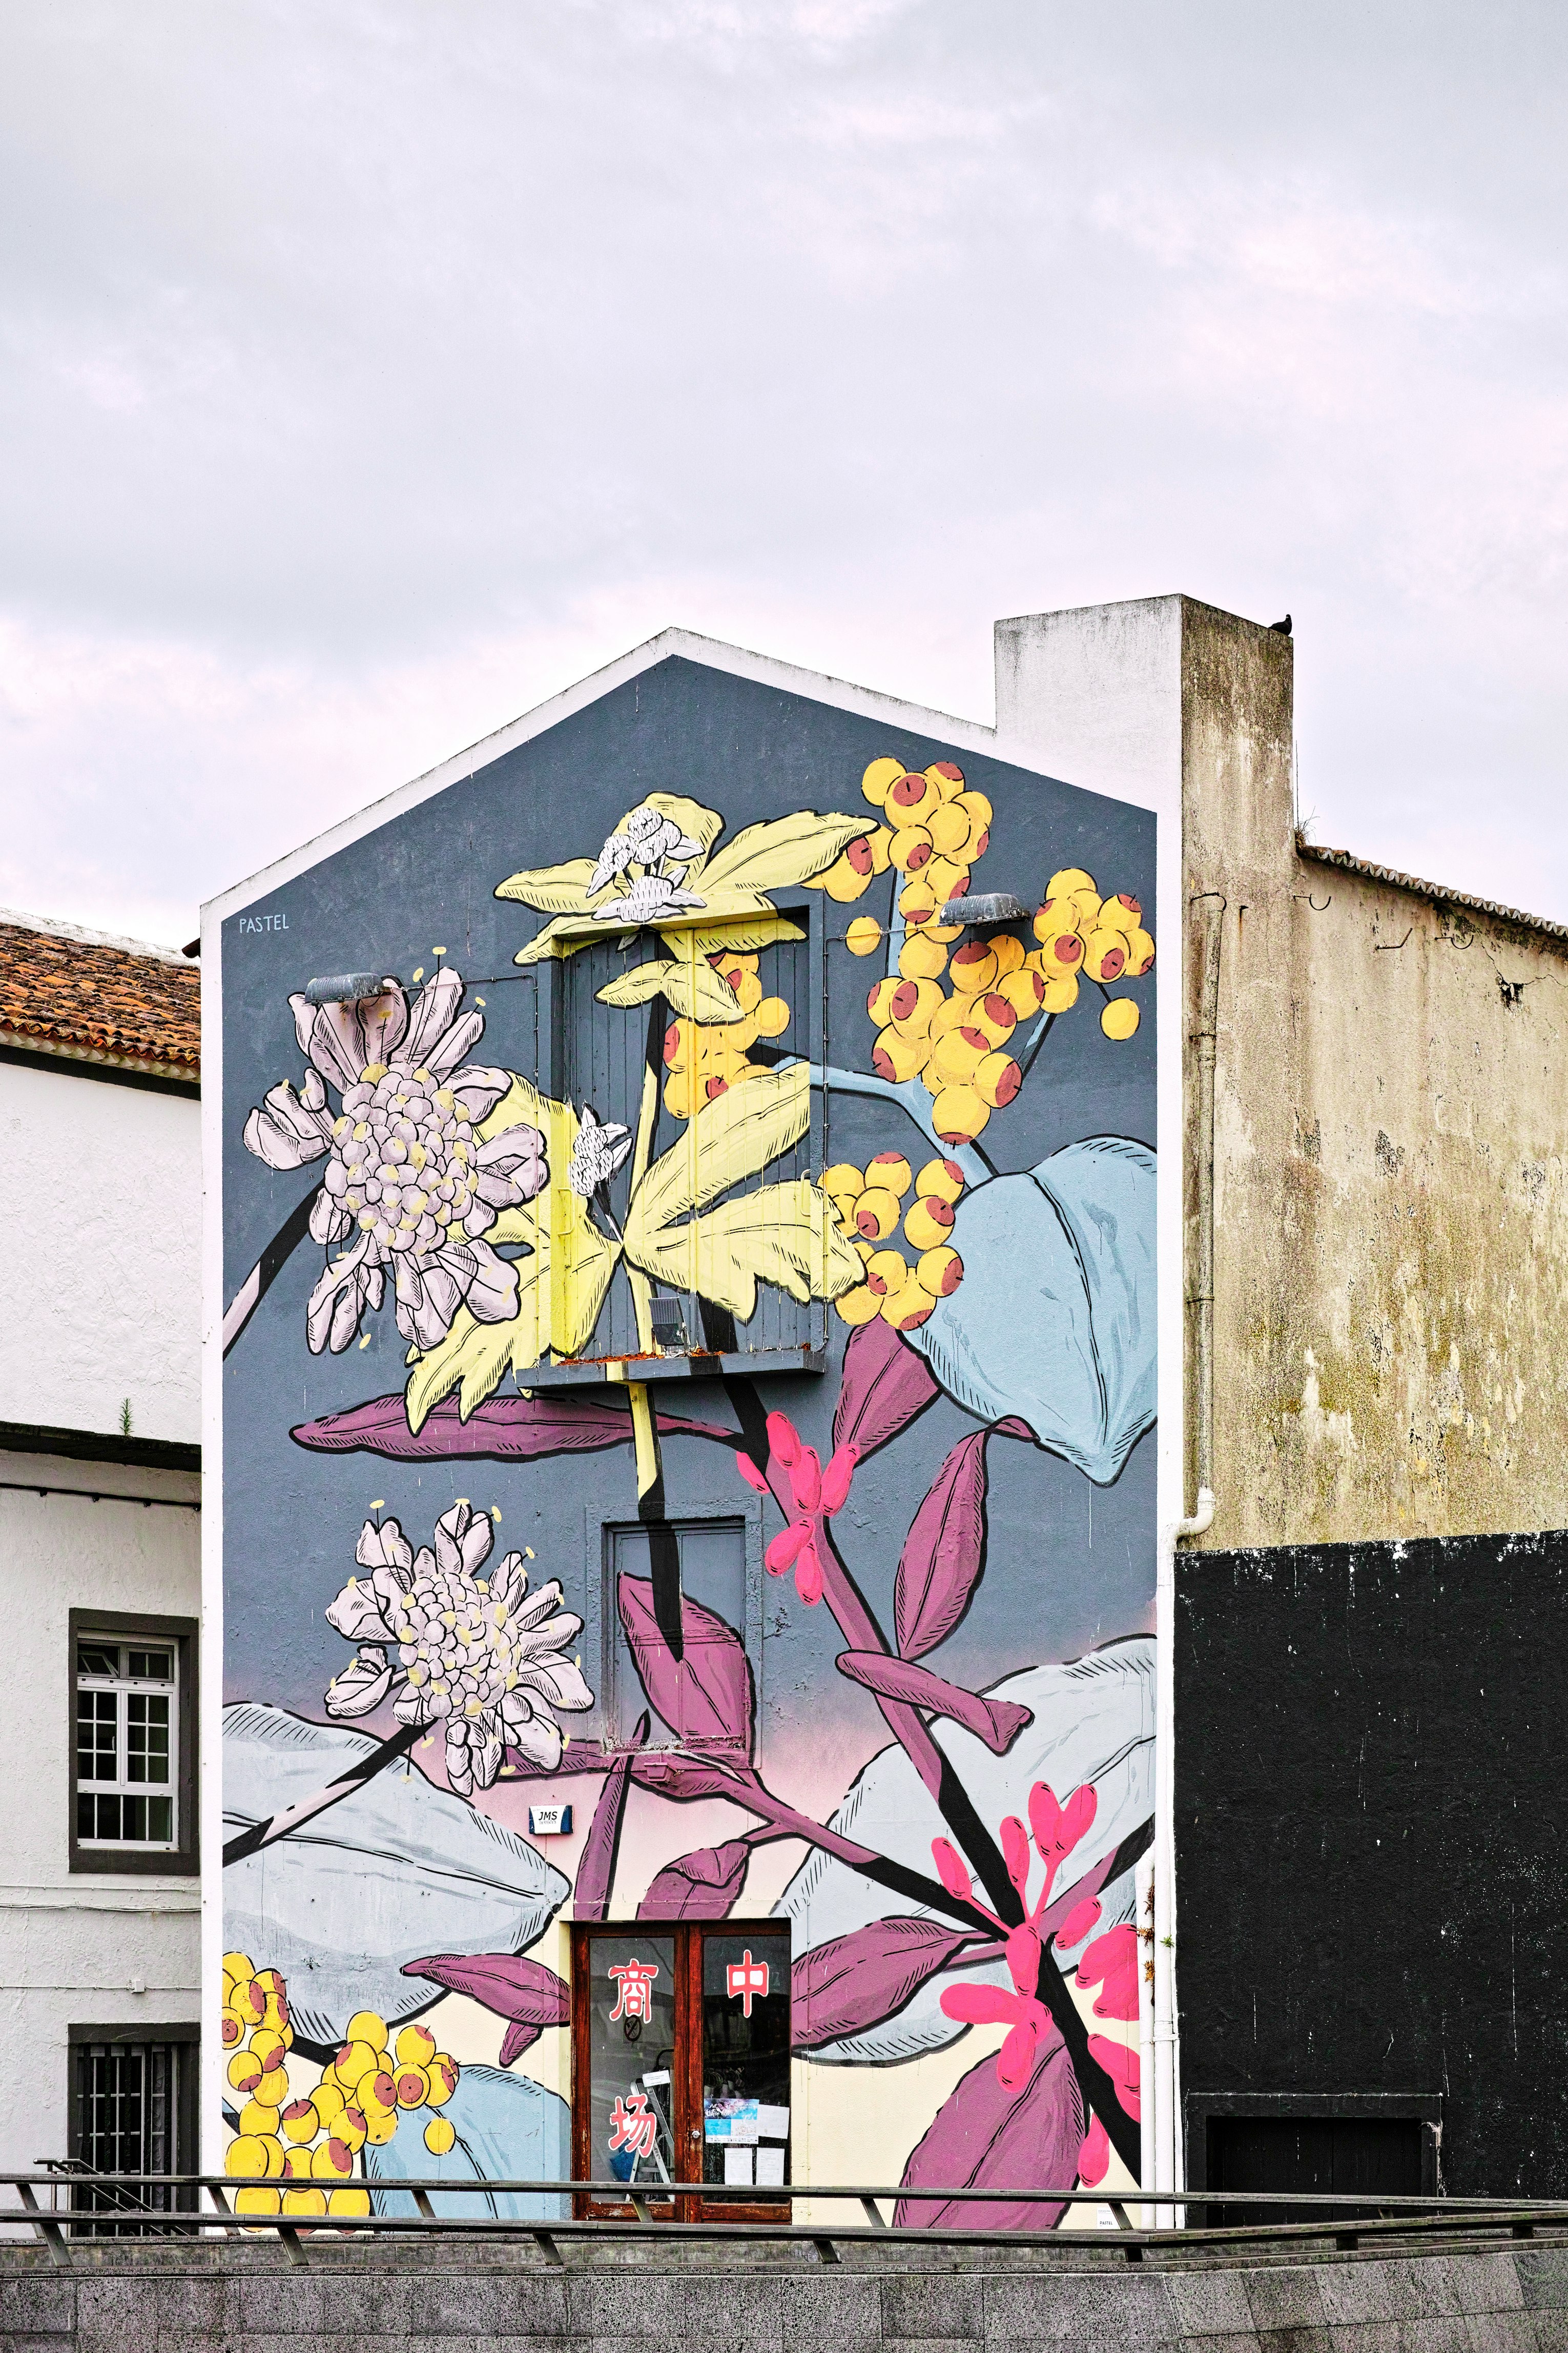 multicolored floral painting on building at daytime